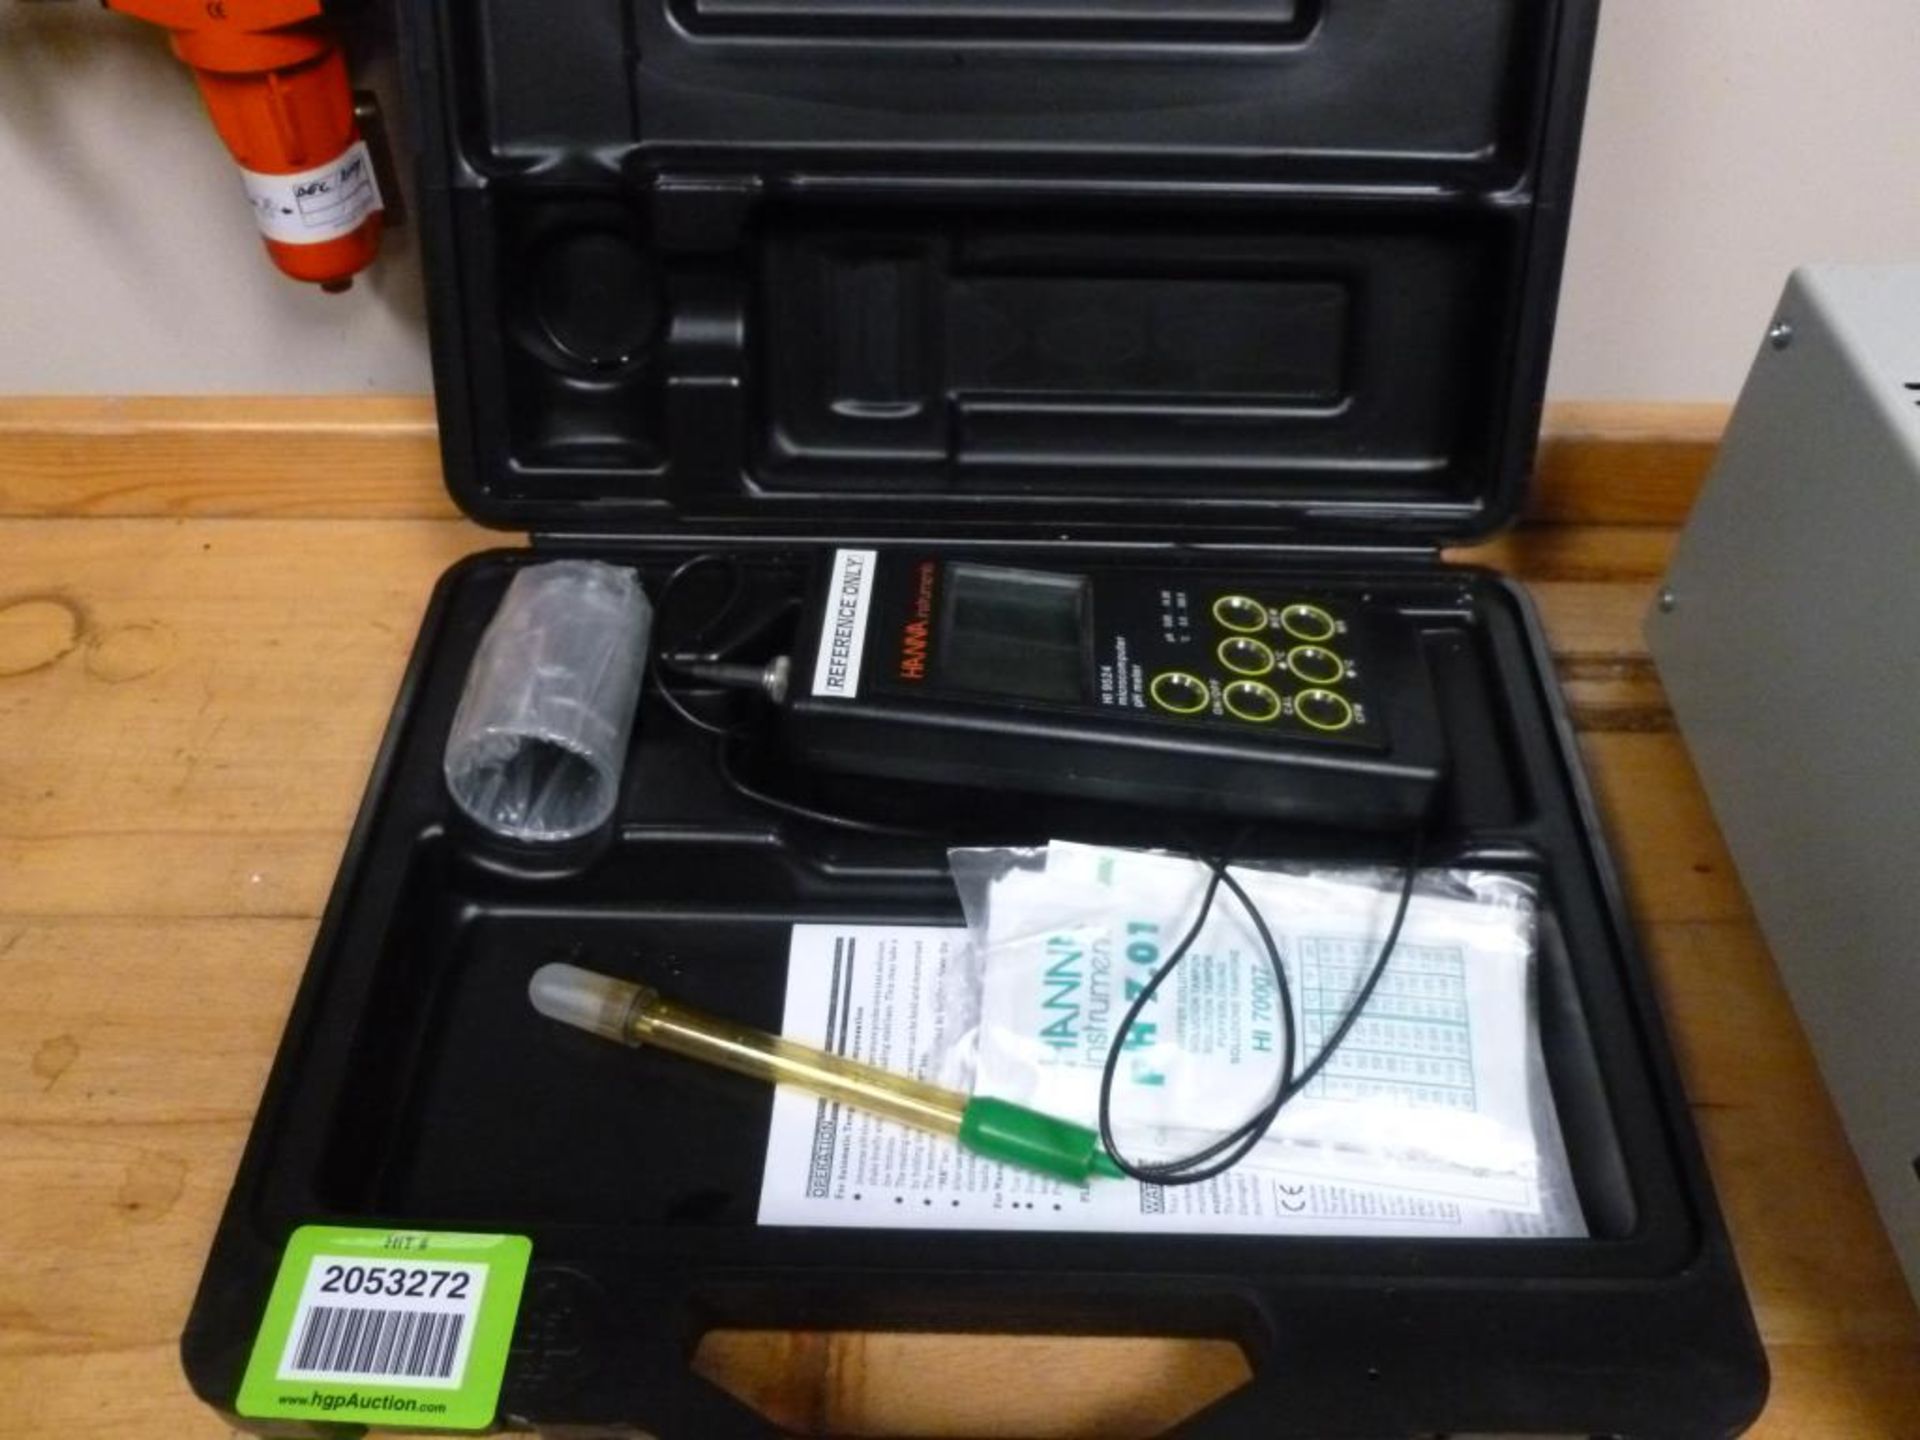 Hanna Hi 9524 Micro Computer Ph Meter, in Carry Case. HIT# 2053272. PRA Department. Asset Located at